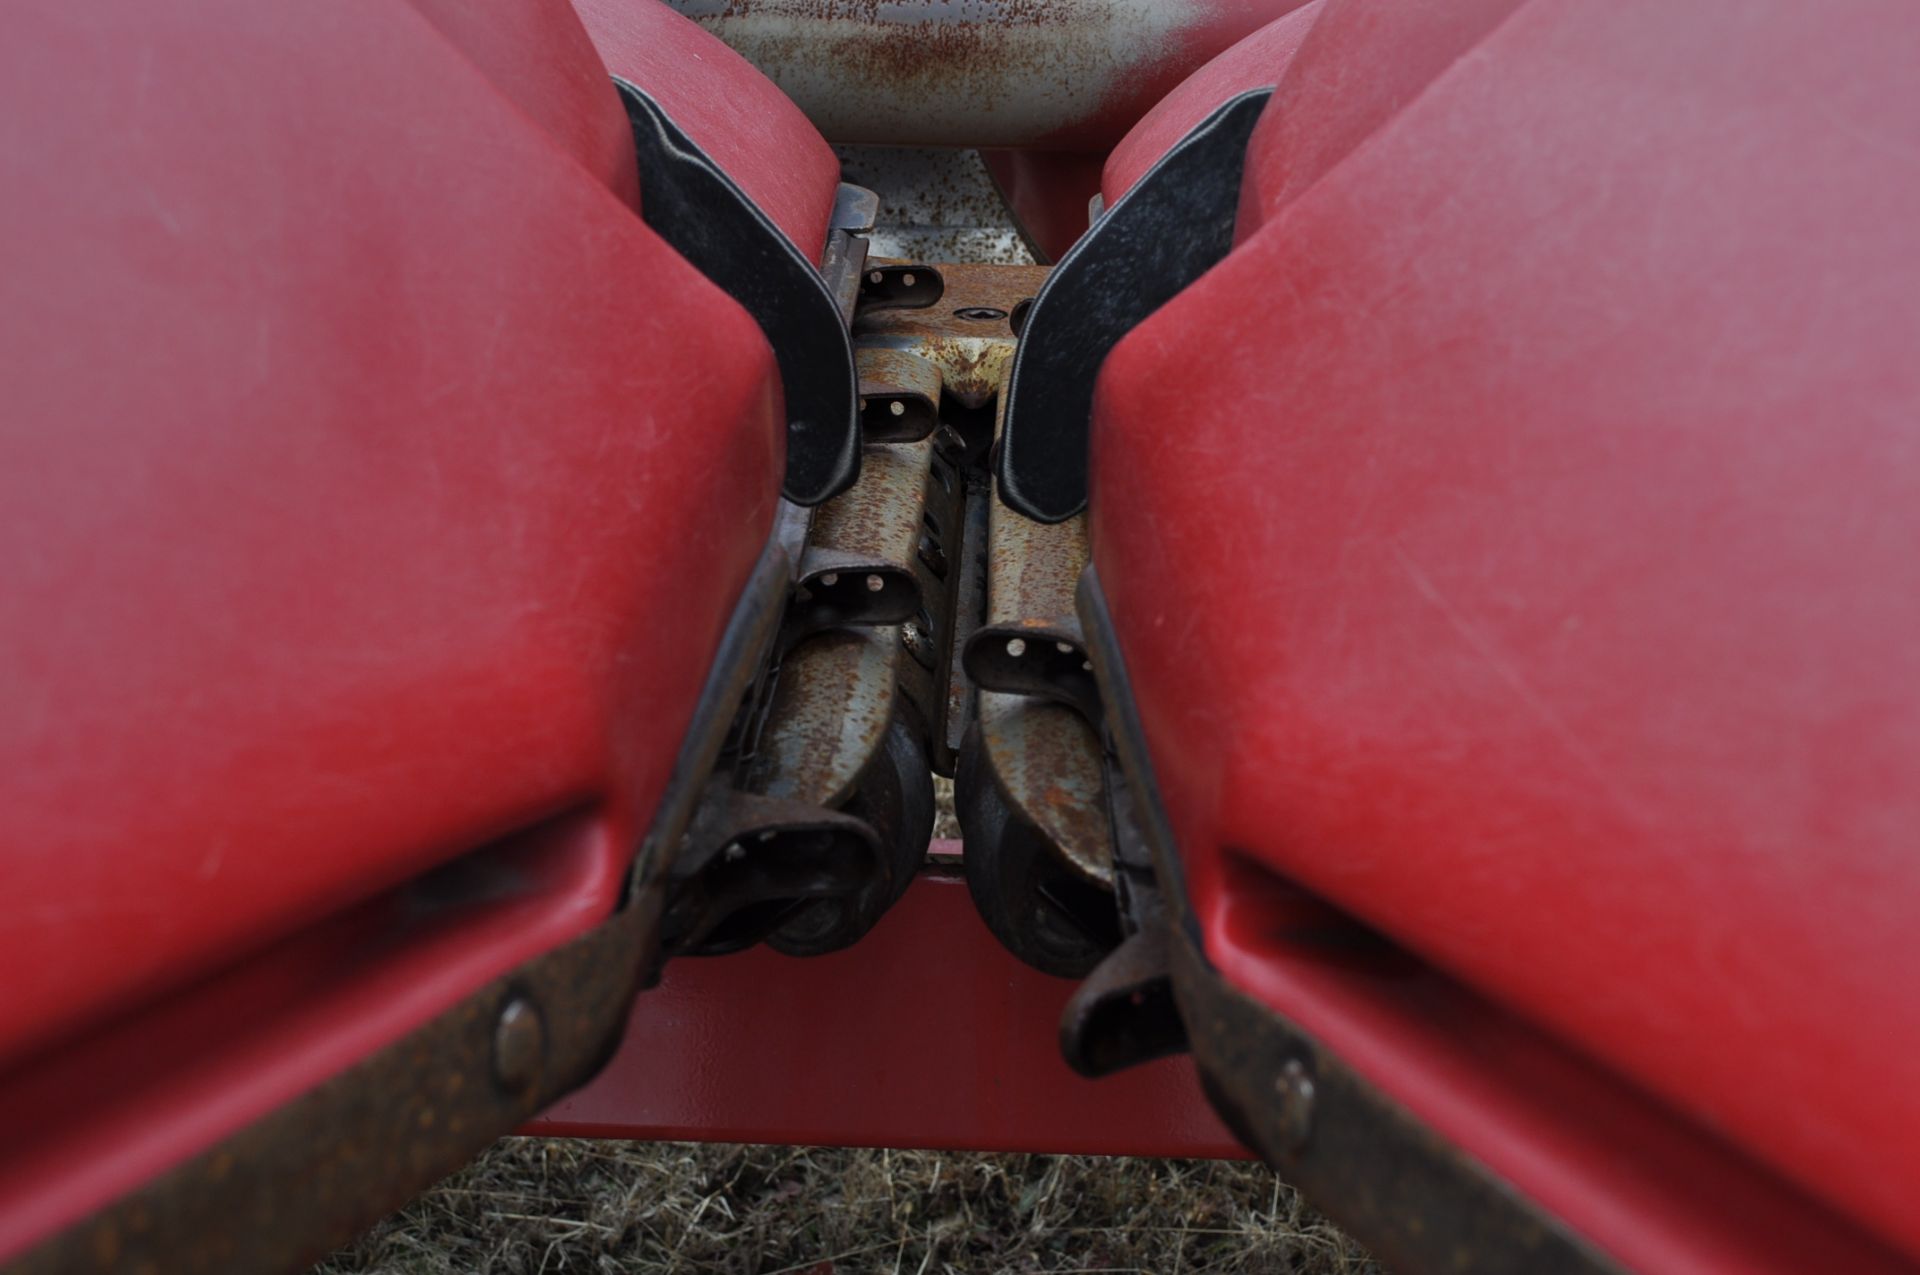 CASE IH 2208 Poly Corn Head, 8 rows x 30”, hyd deck plates, knife rolls, poly, 3 header height - Image 14 of 16